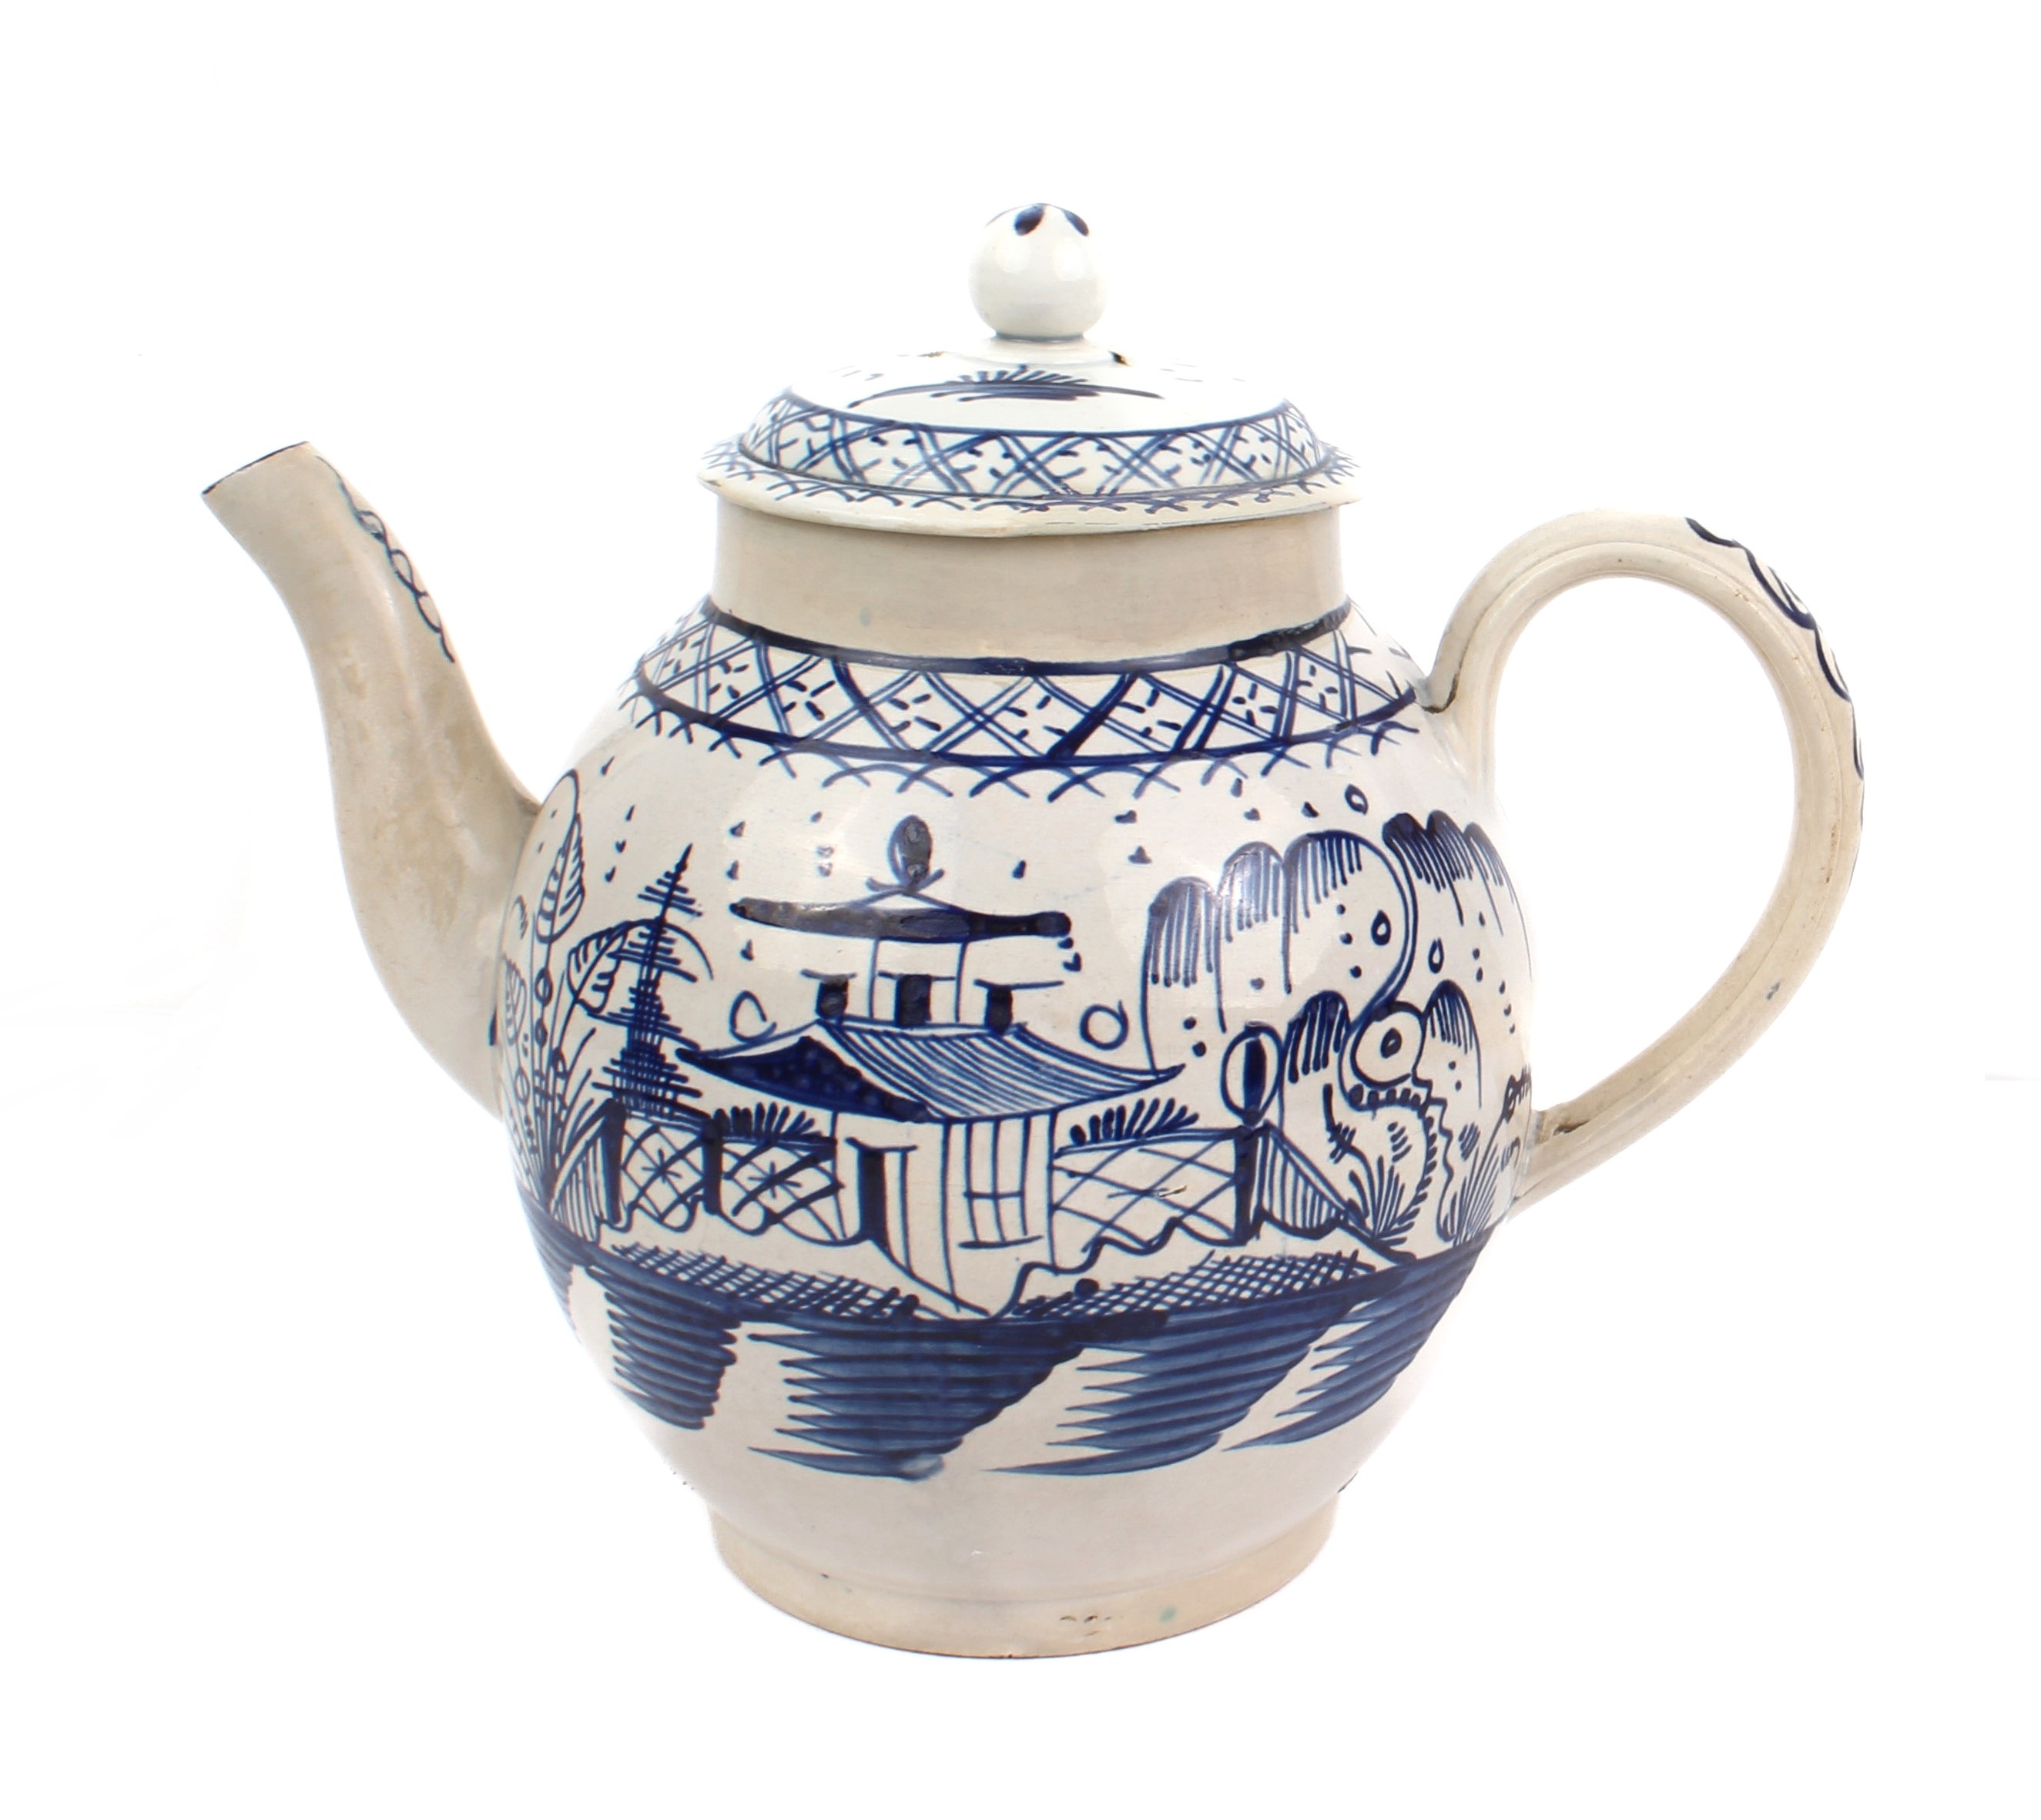 A late 18th century English pearlware hand-painted teapot with blue and white floral design (with